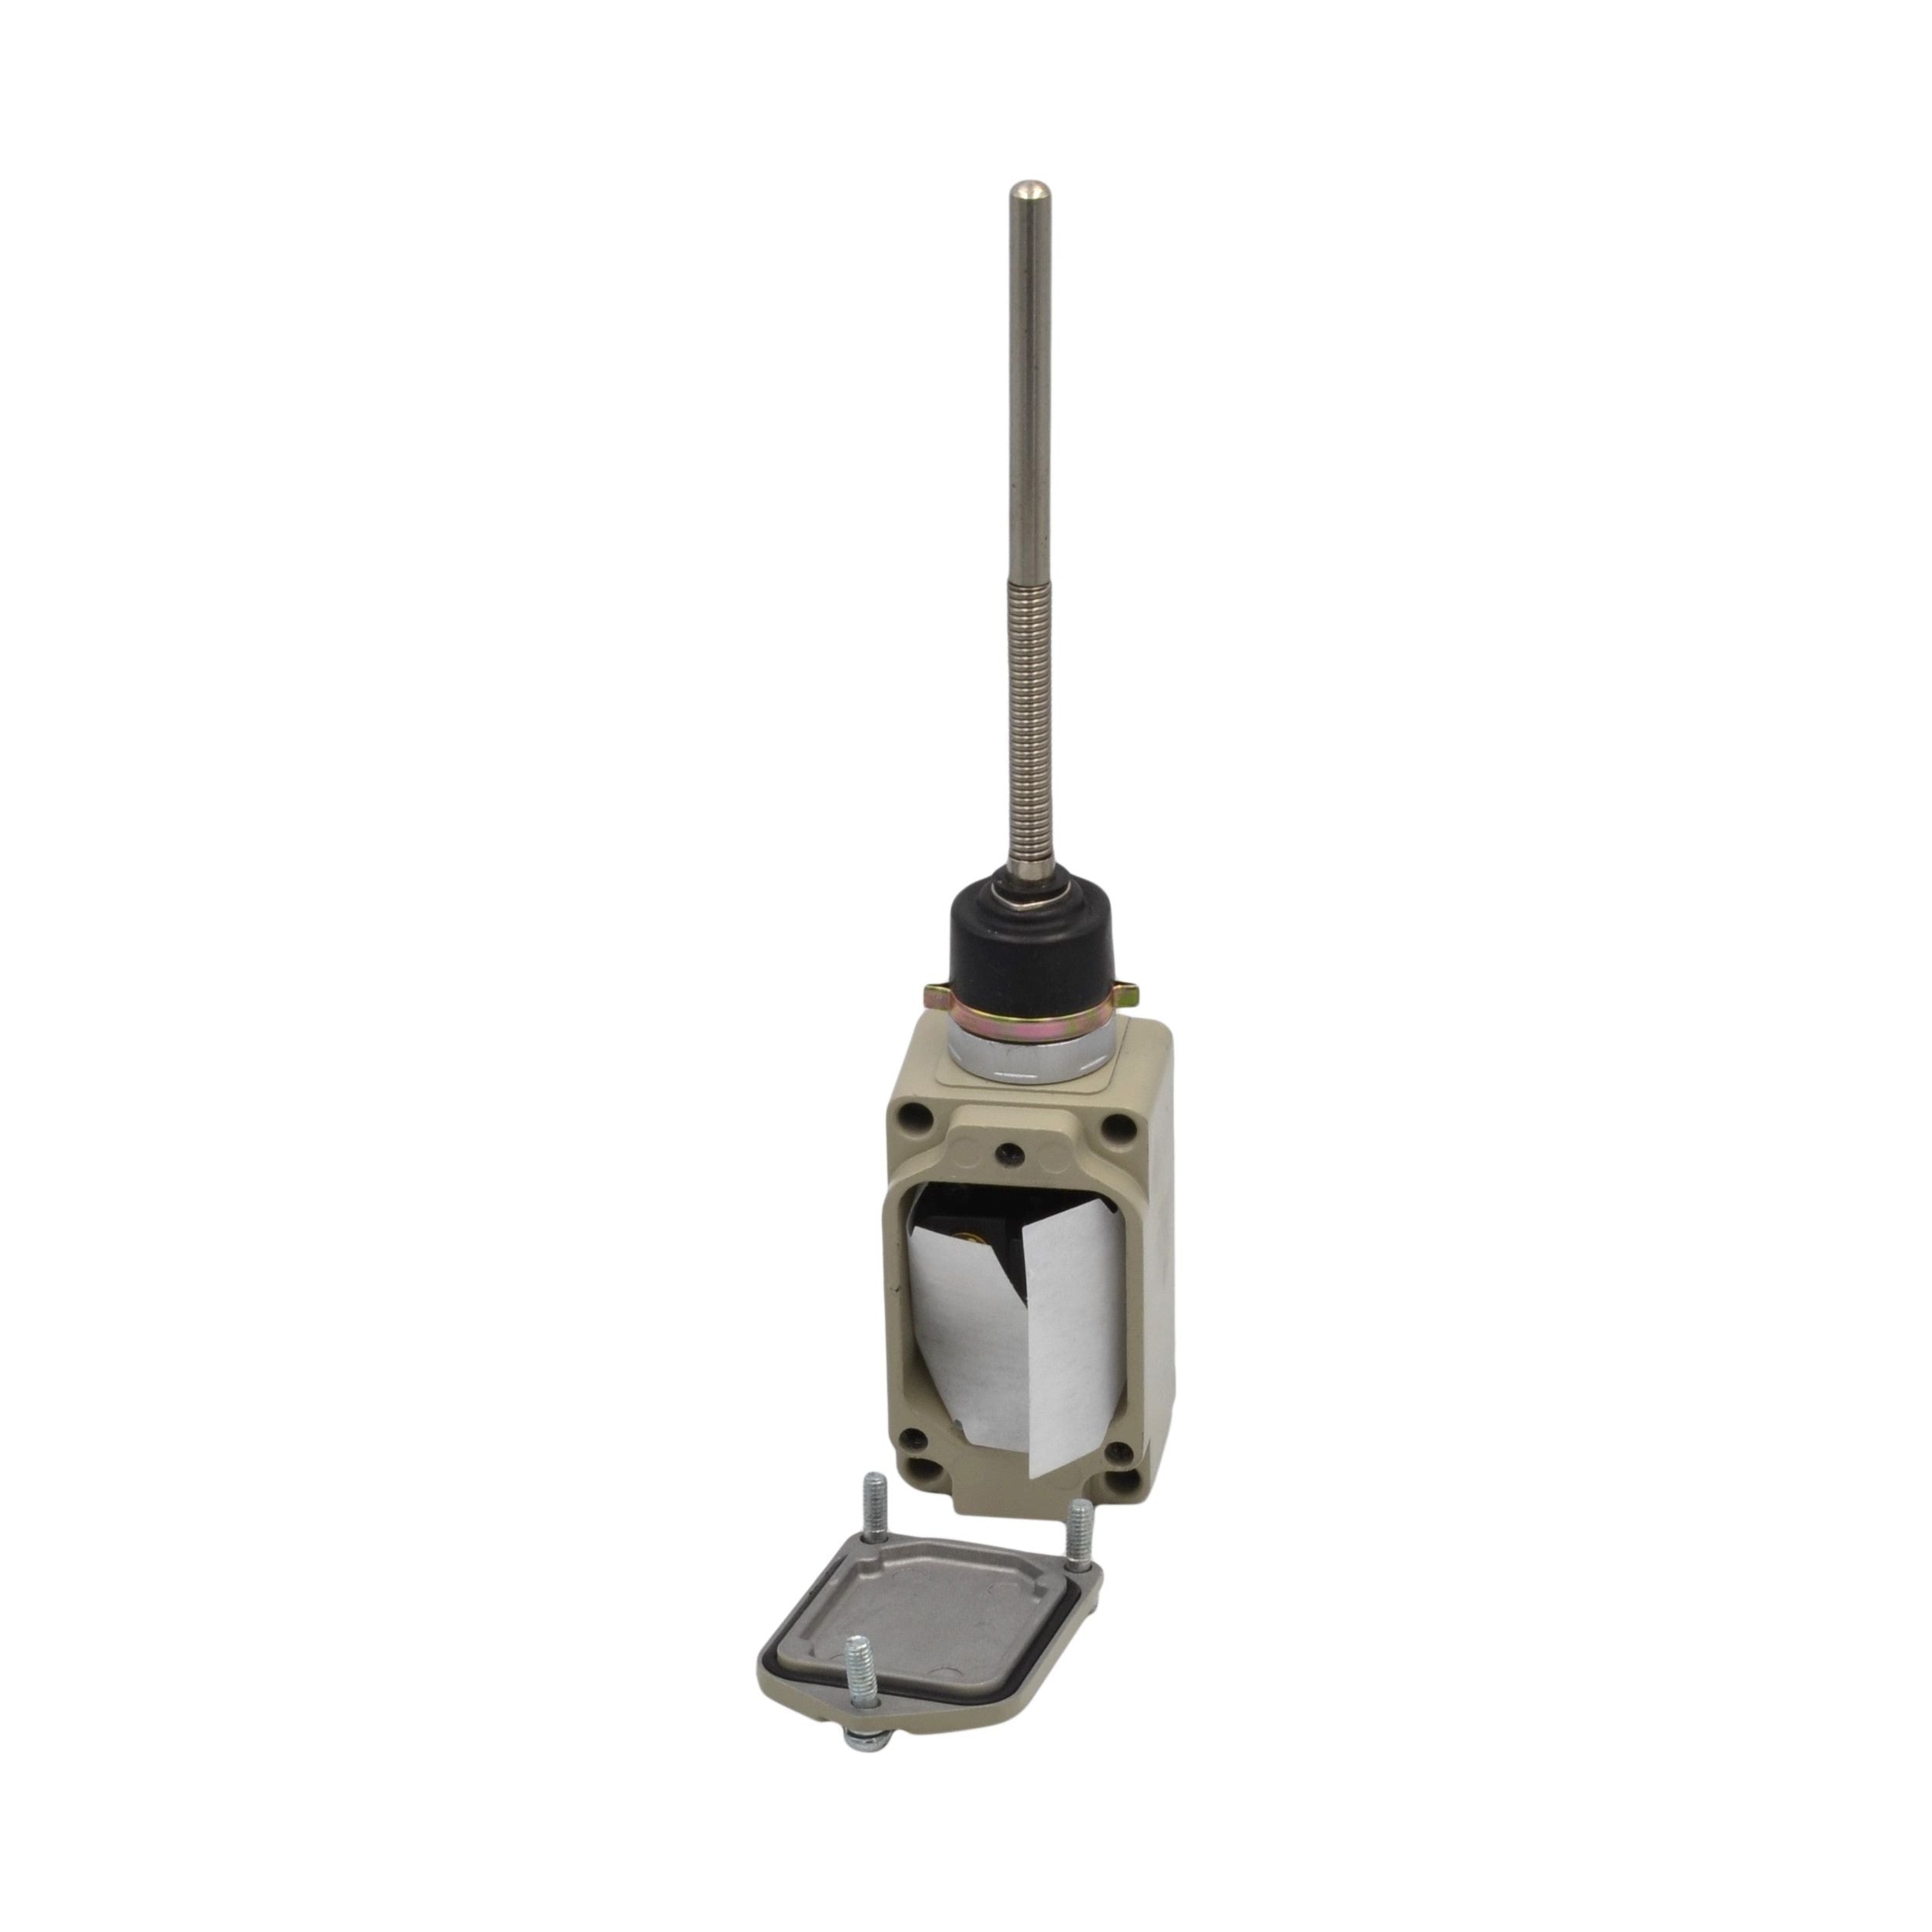 WLNJ-30 Stainless Steel Coil Spring Lever Limit Switch